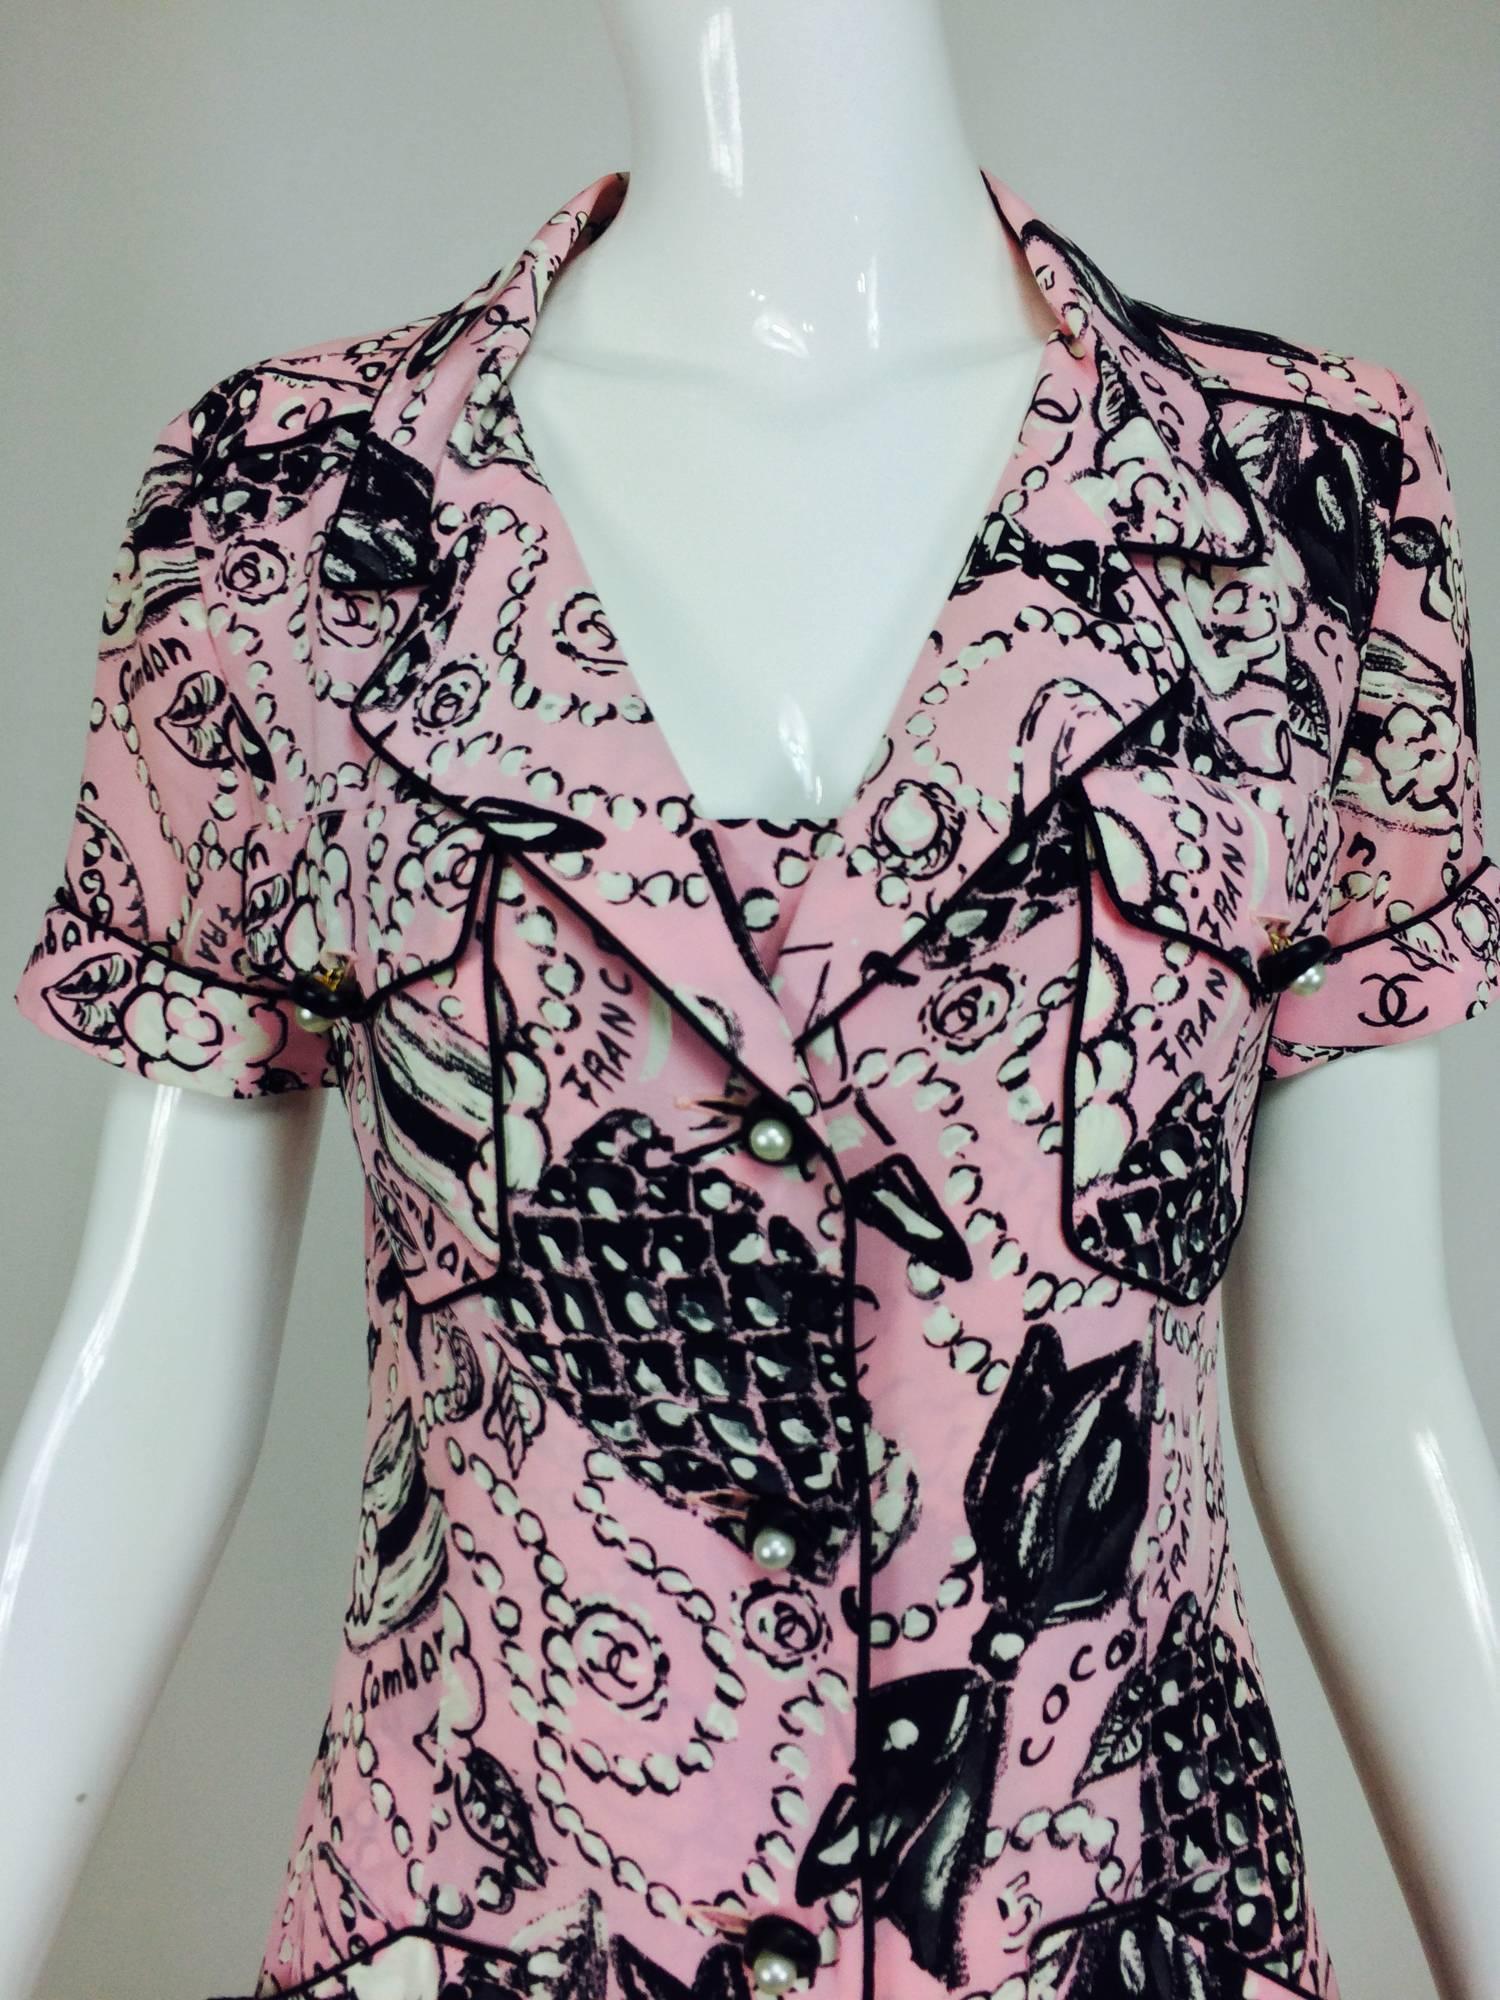 Chanel rare Claudia Schiffer runway worn Coco print dress pink silk 1993...1940s influenced, button front dress with short sleeves that have turn back cuffs...Front and back yoke...Two flap front button through chest pockets...The dress has a